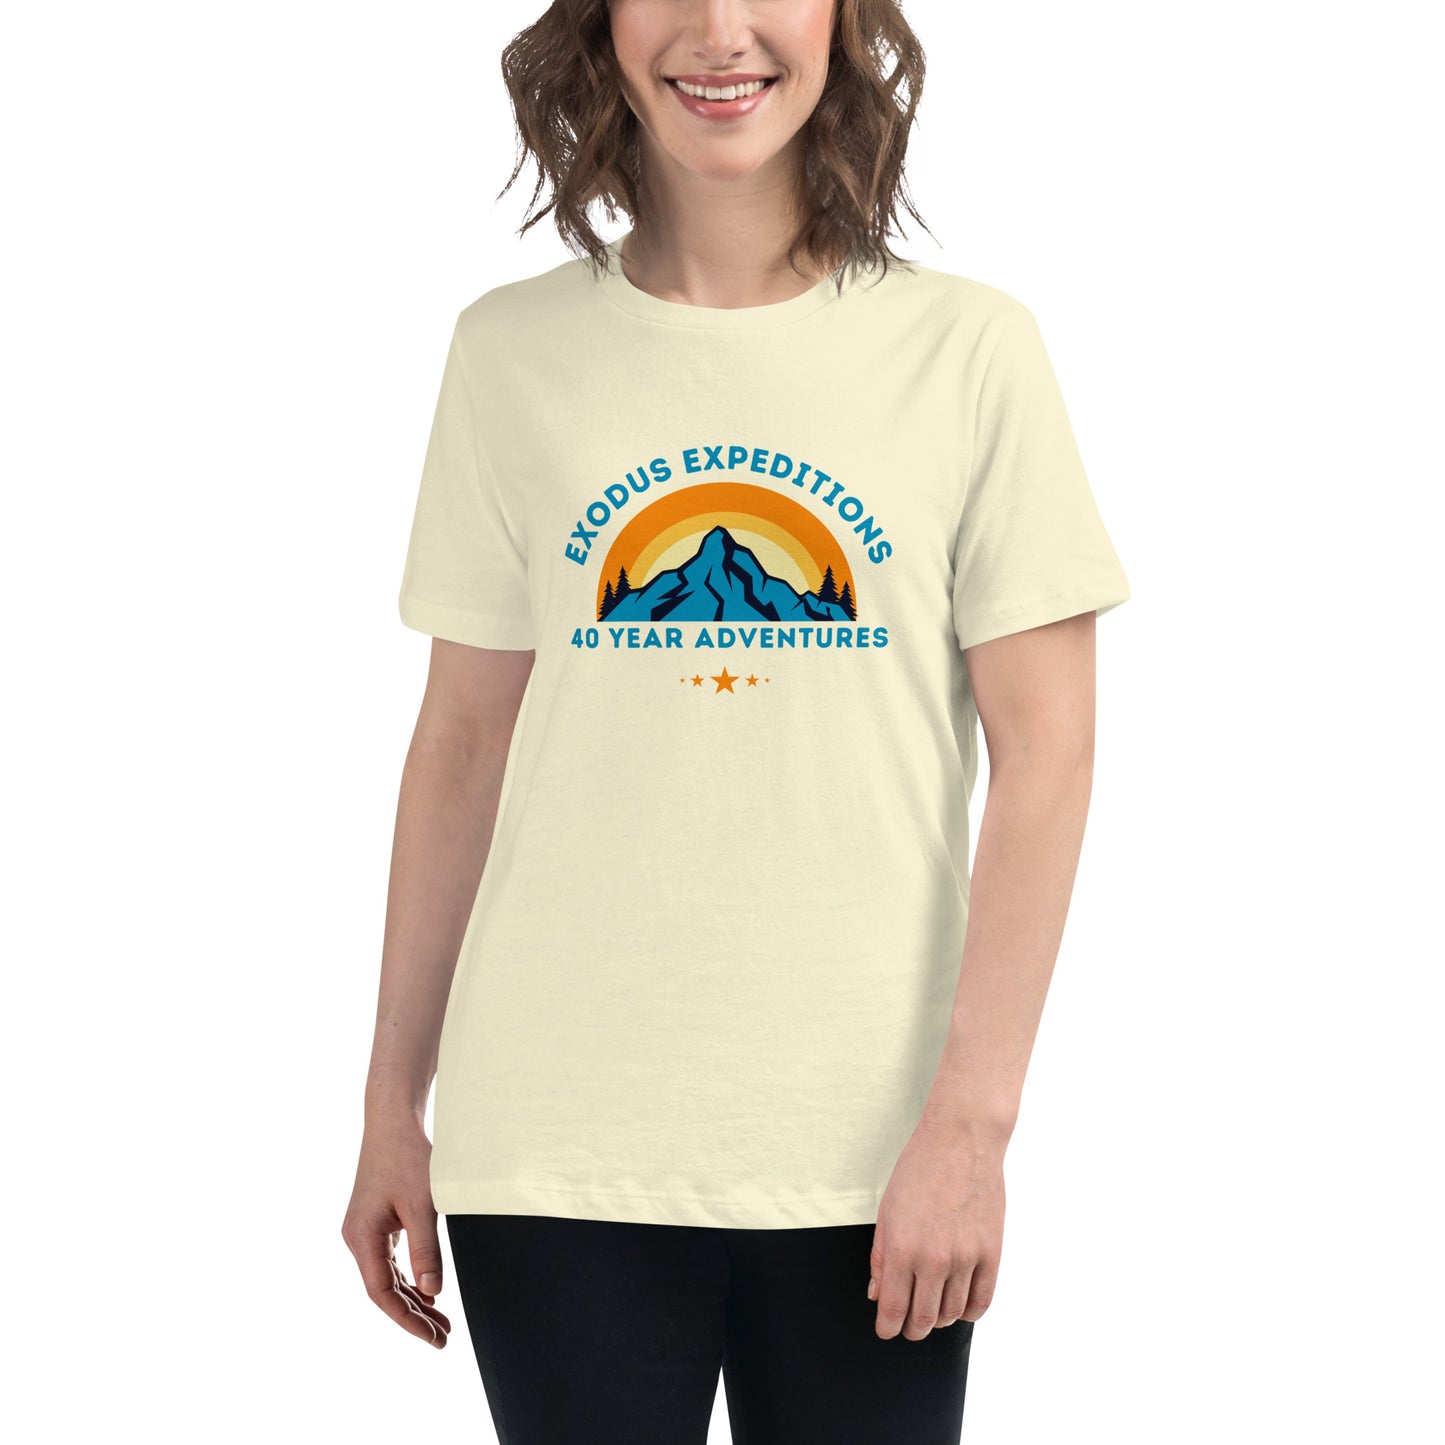 EXODUS EXPEDITIONS 40 YEAR ADVENTURES Women's Relaxed T-Shirt